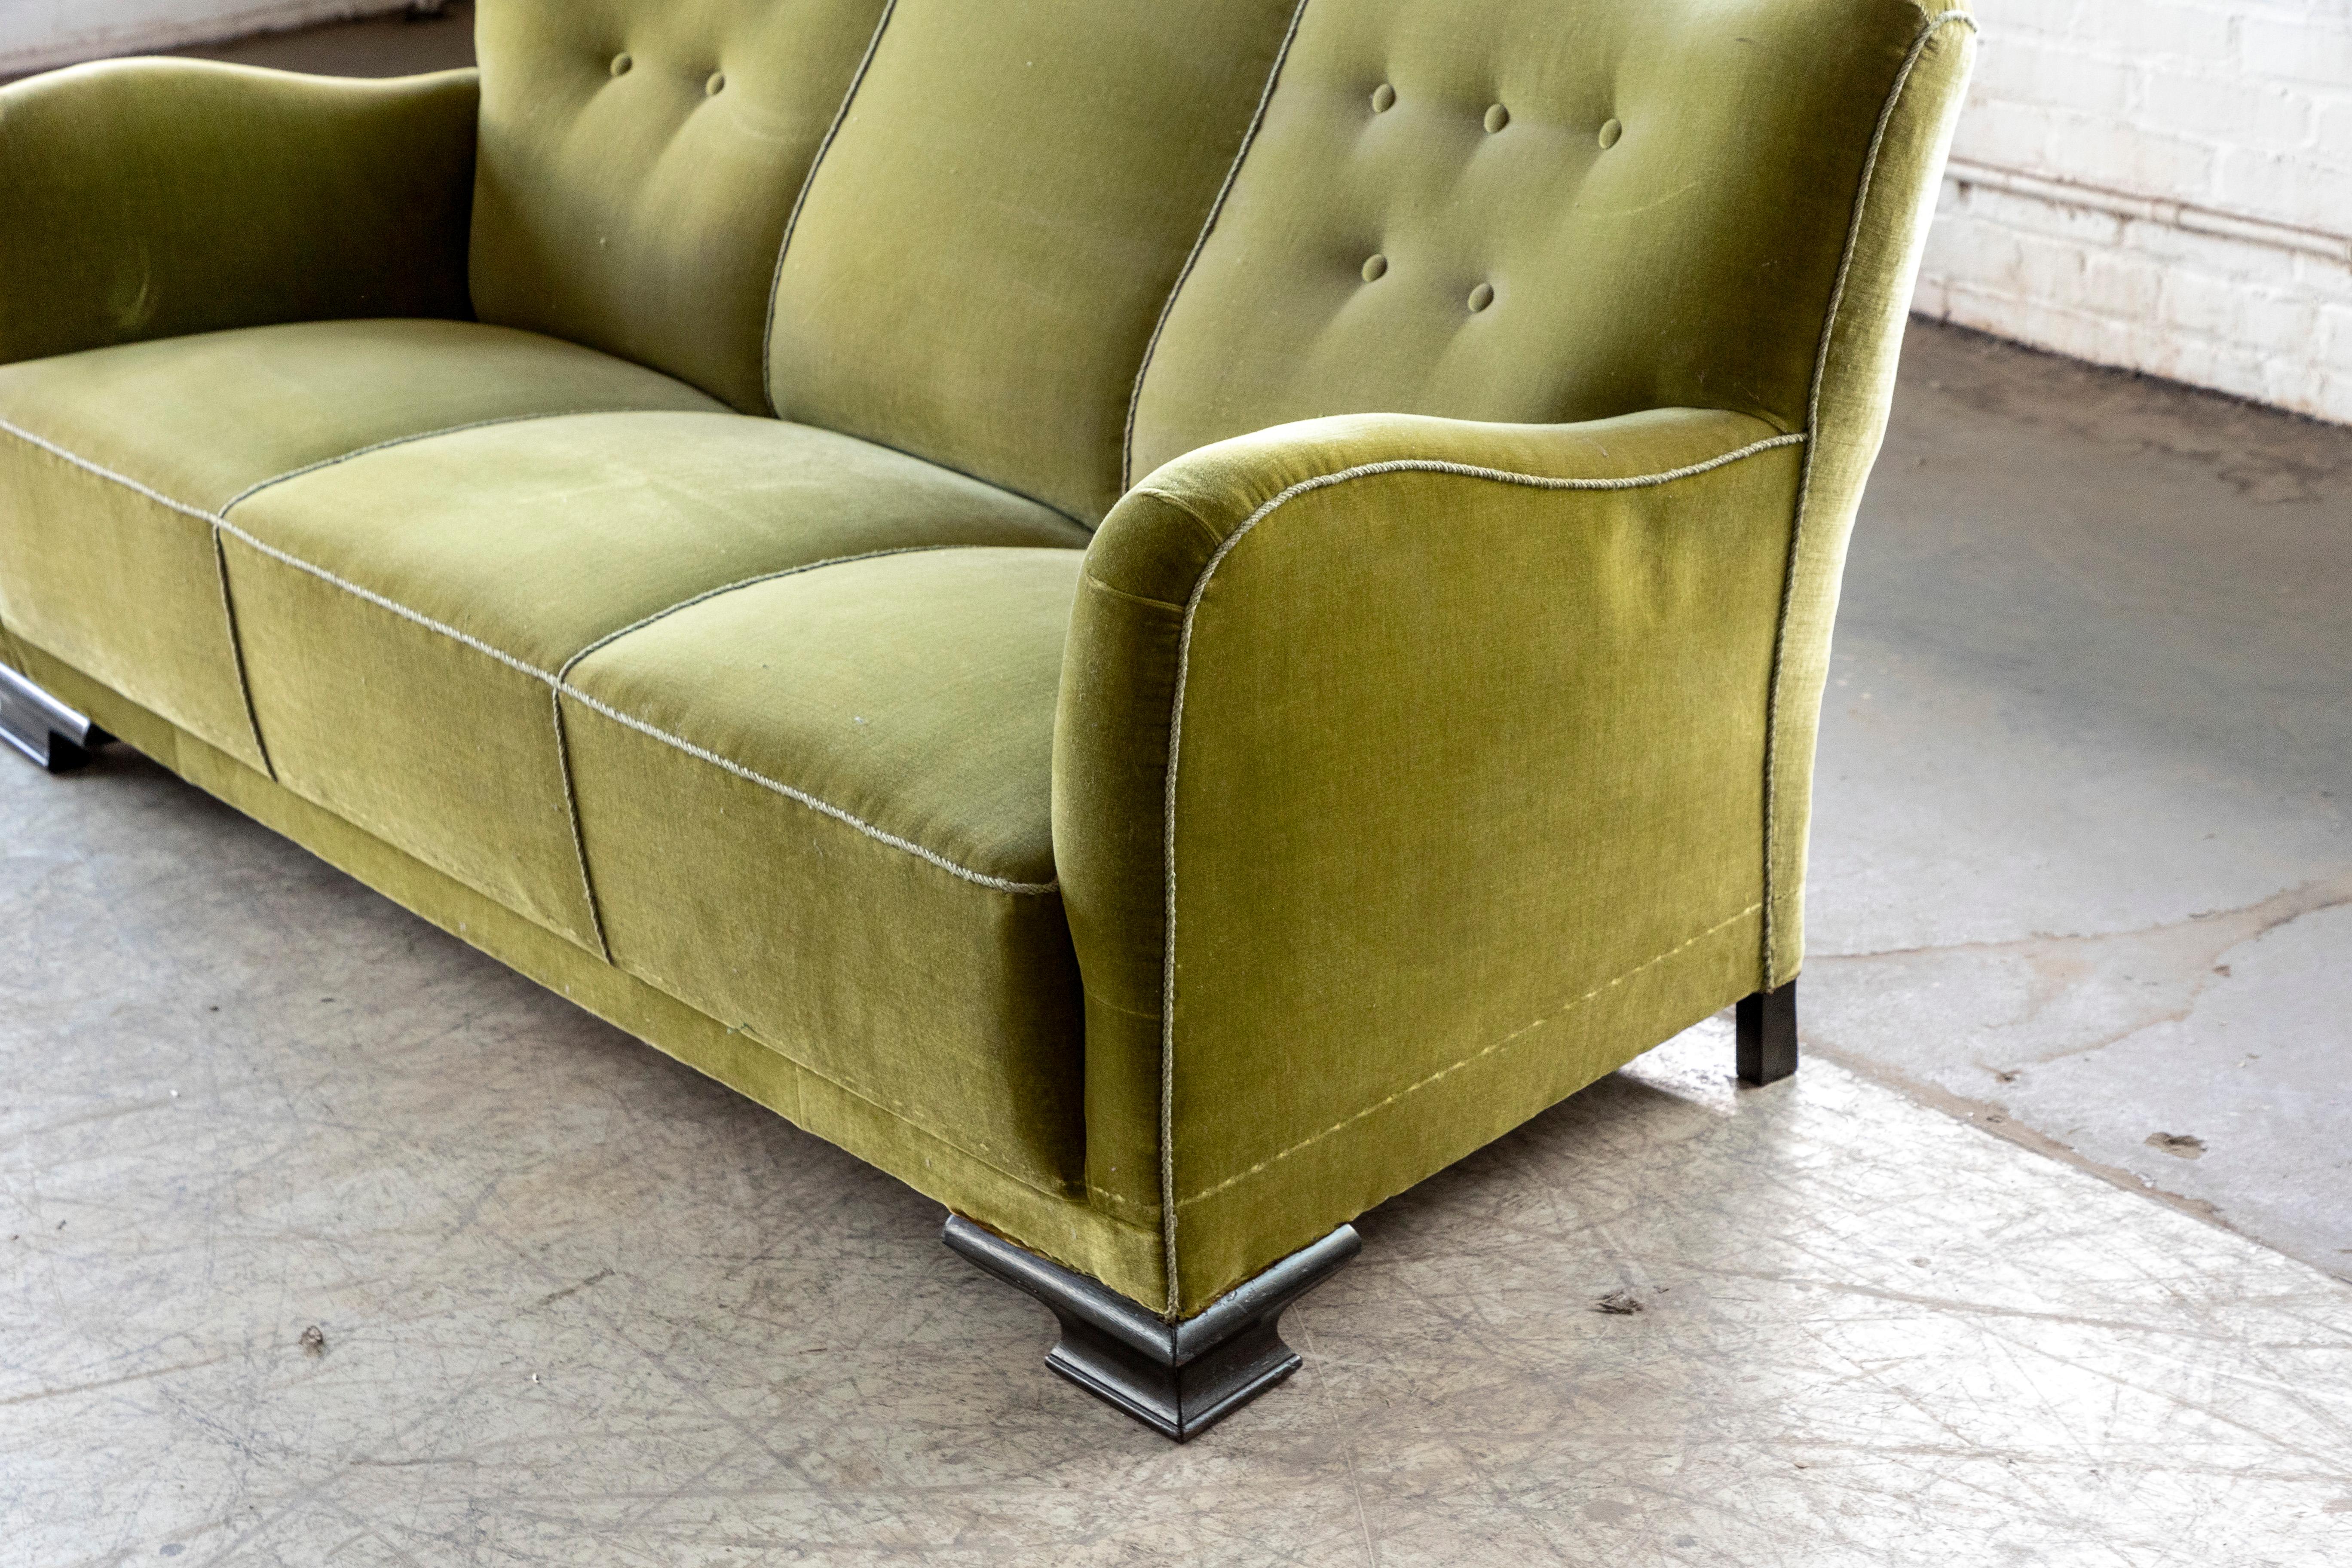 Mid-20th Century Danish Midcentury Sofa in Green Mohair with Art Deco Legs For Sale